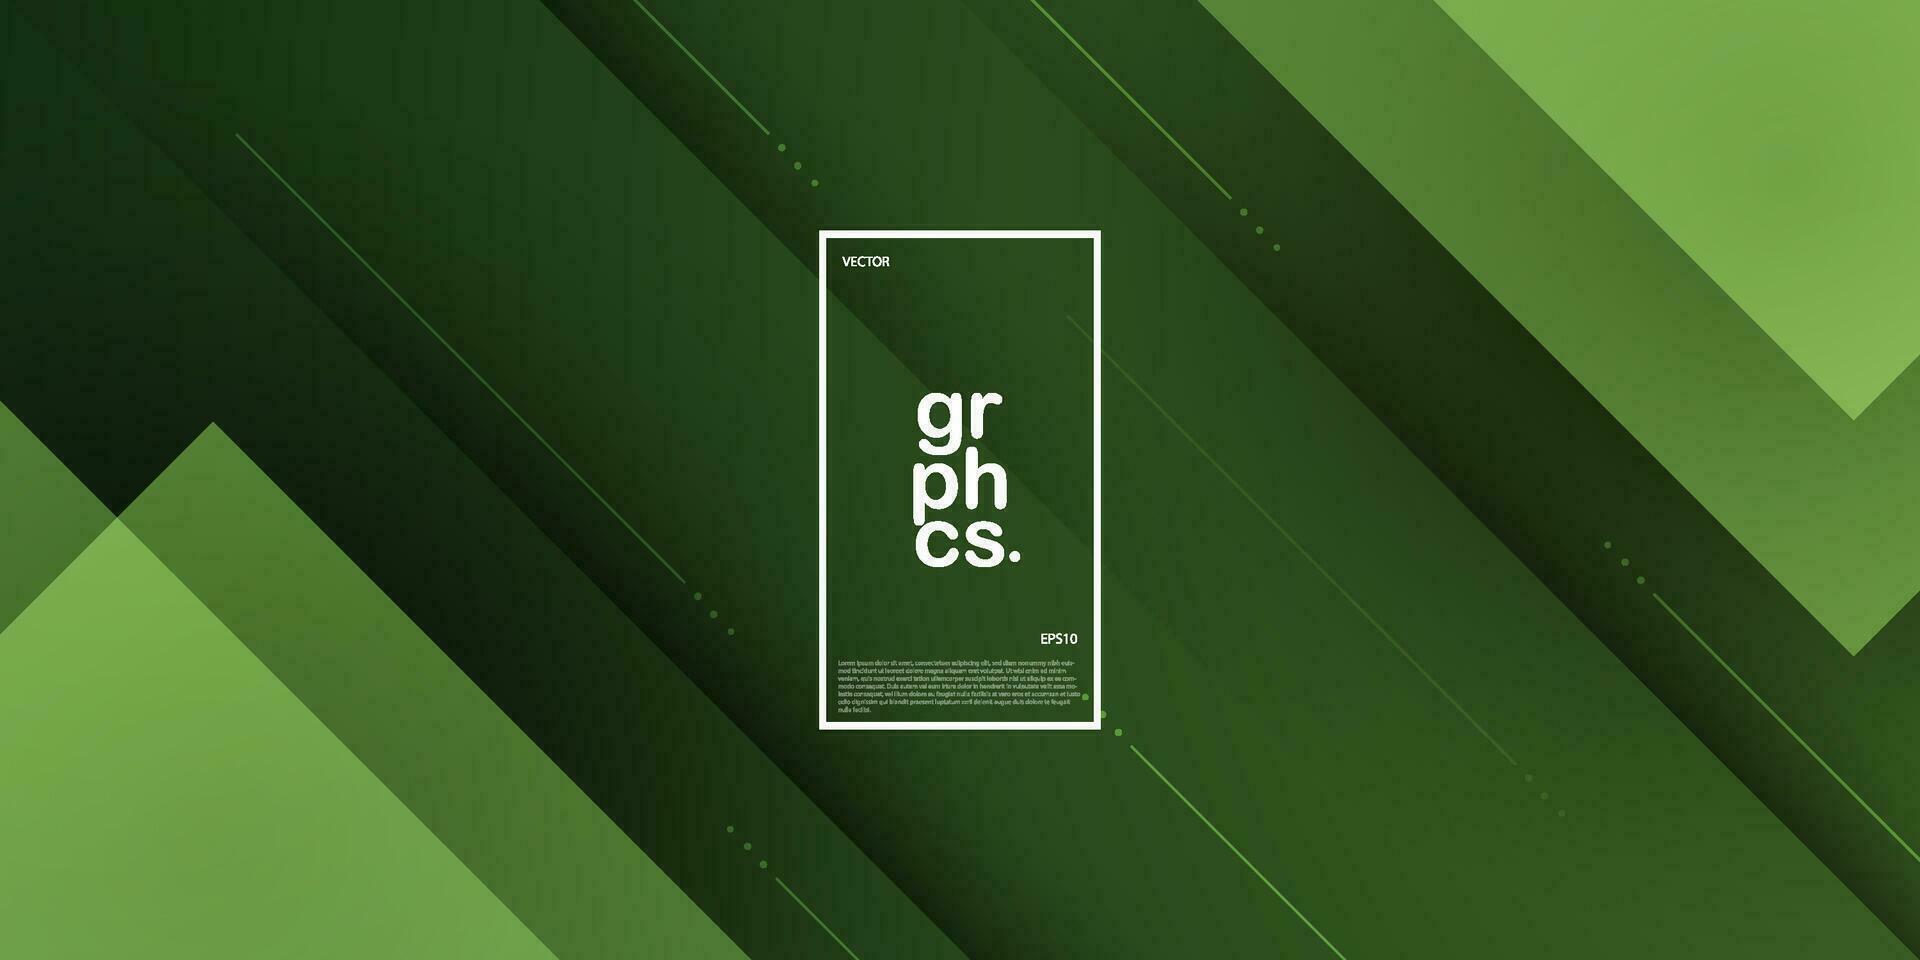 Abstract green overlap background template vector with overlay lines and shapes. Dark green background with trendy pattern design. Eps10 vector